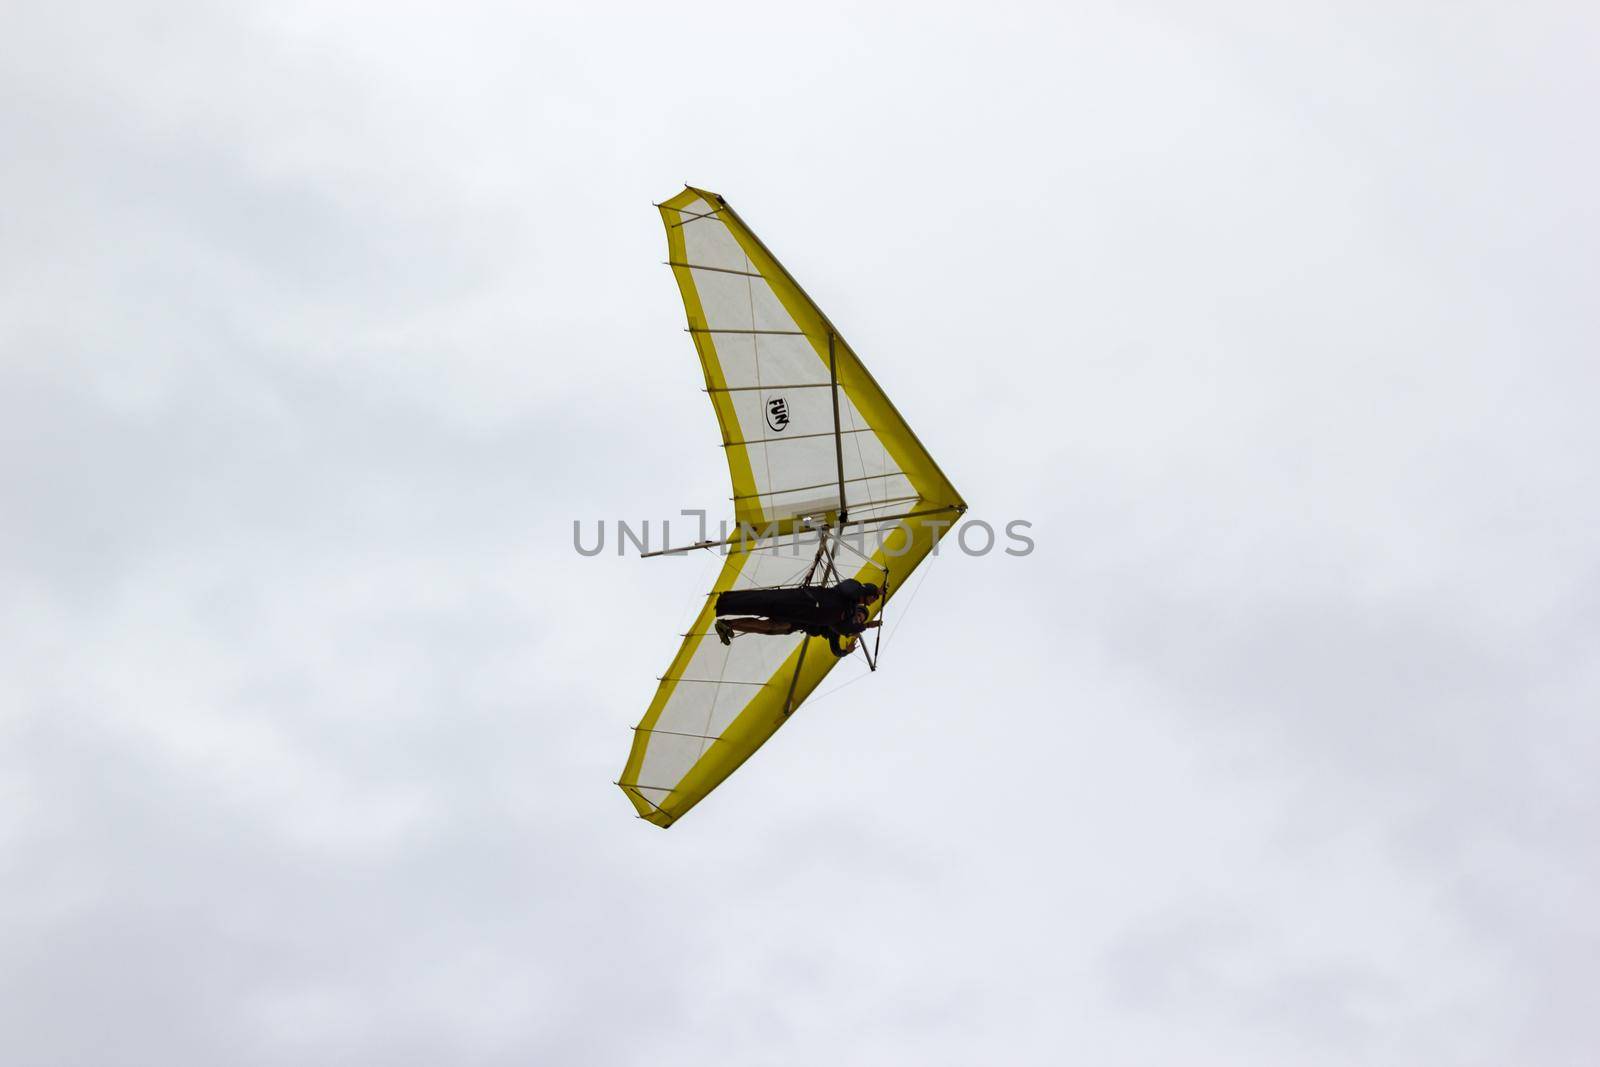 Hang glider flying in Newcastle, New South Wales, Australia by bettercallcurry